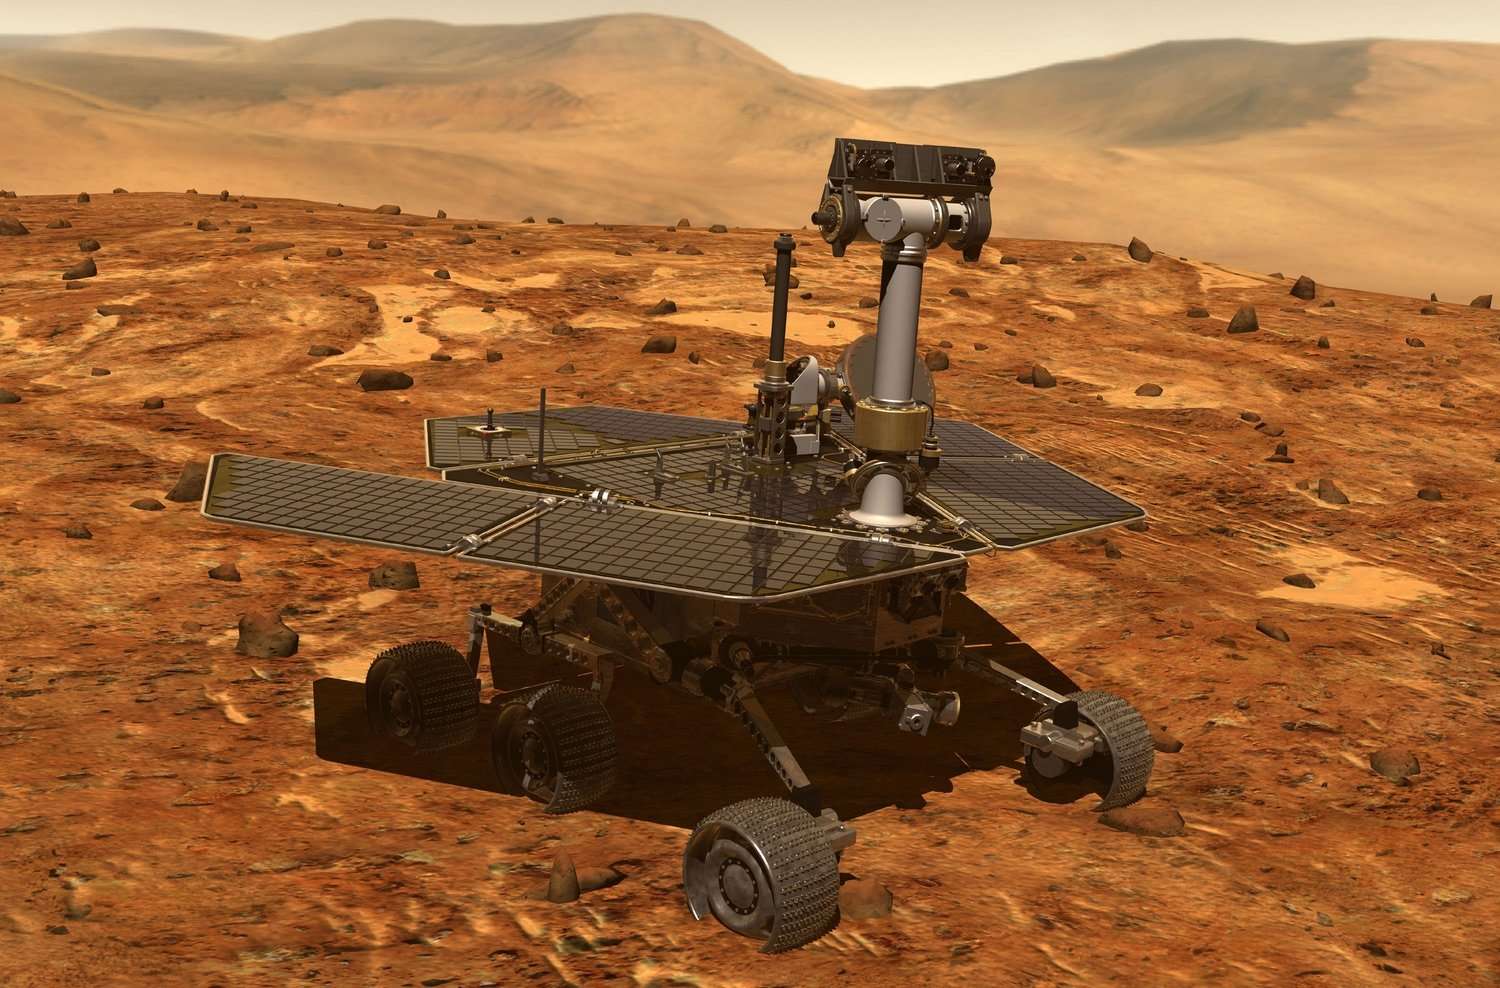 image for NASA to soon end active efforts to restore contact with Opportunity